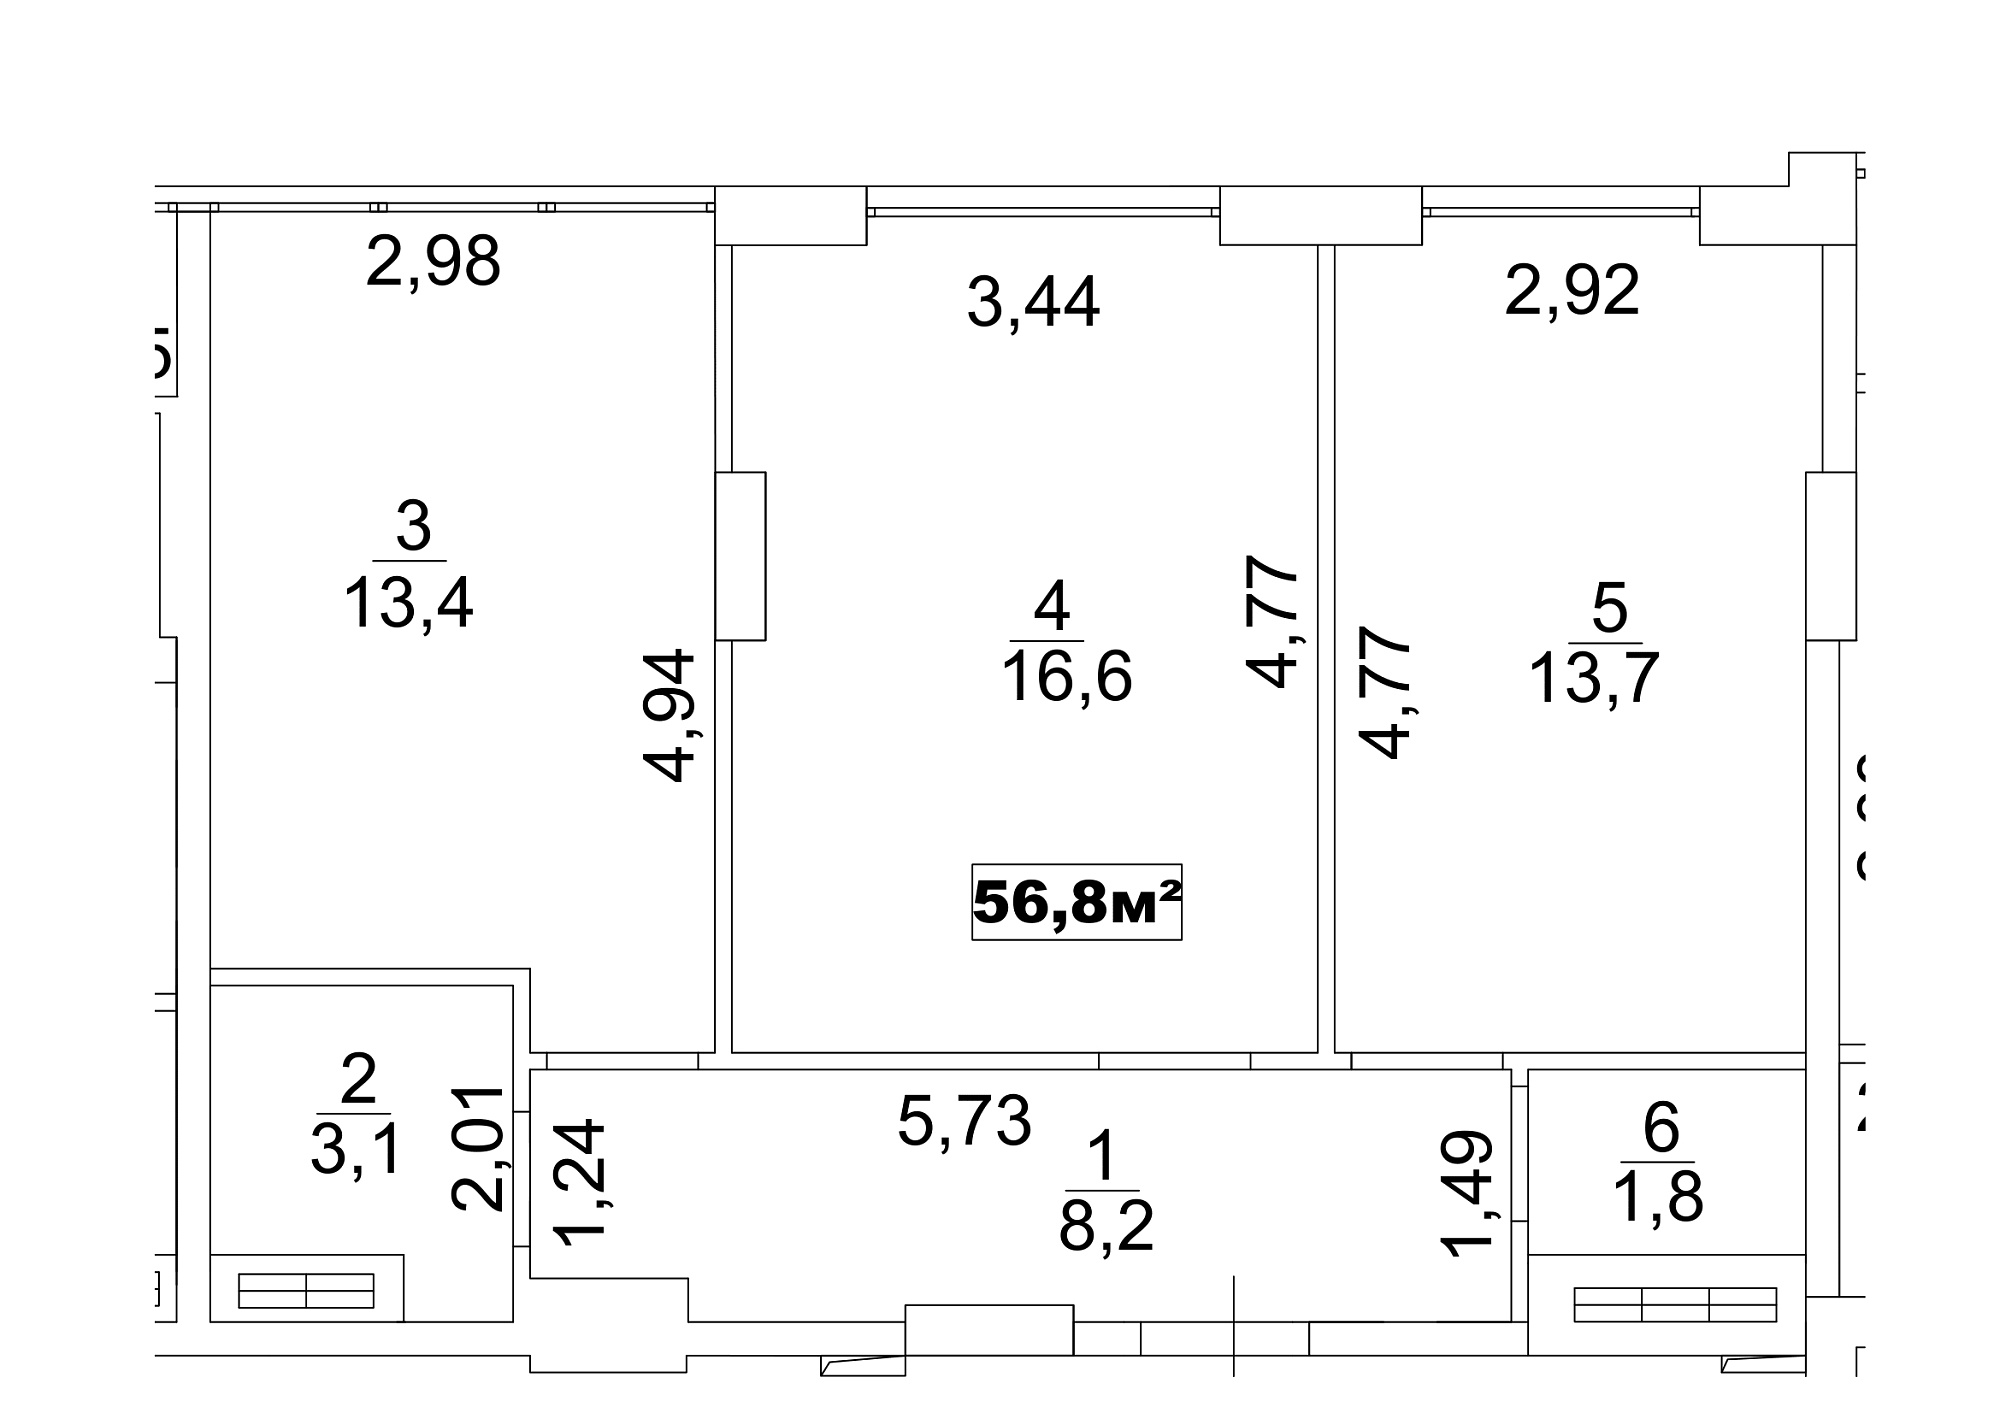 Planning 2-rm flats area 56.8m2, AB-13-10/00082.